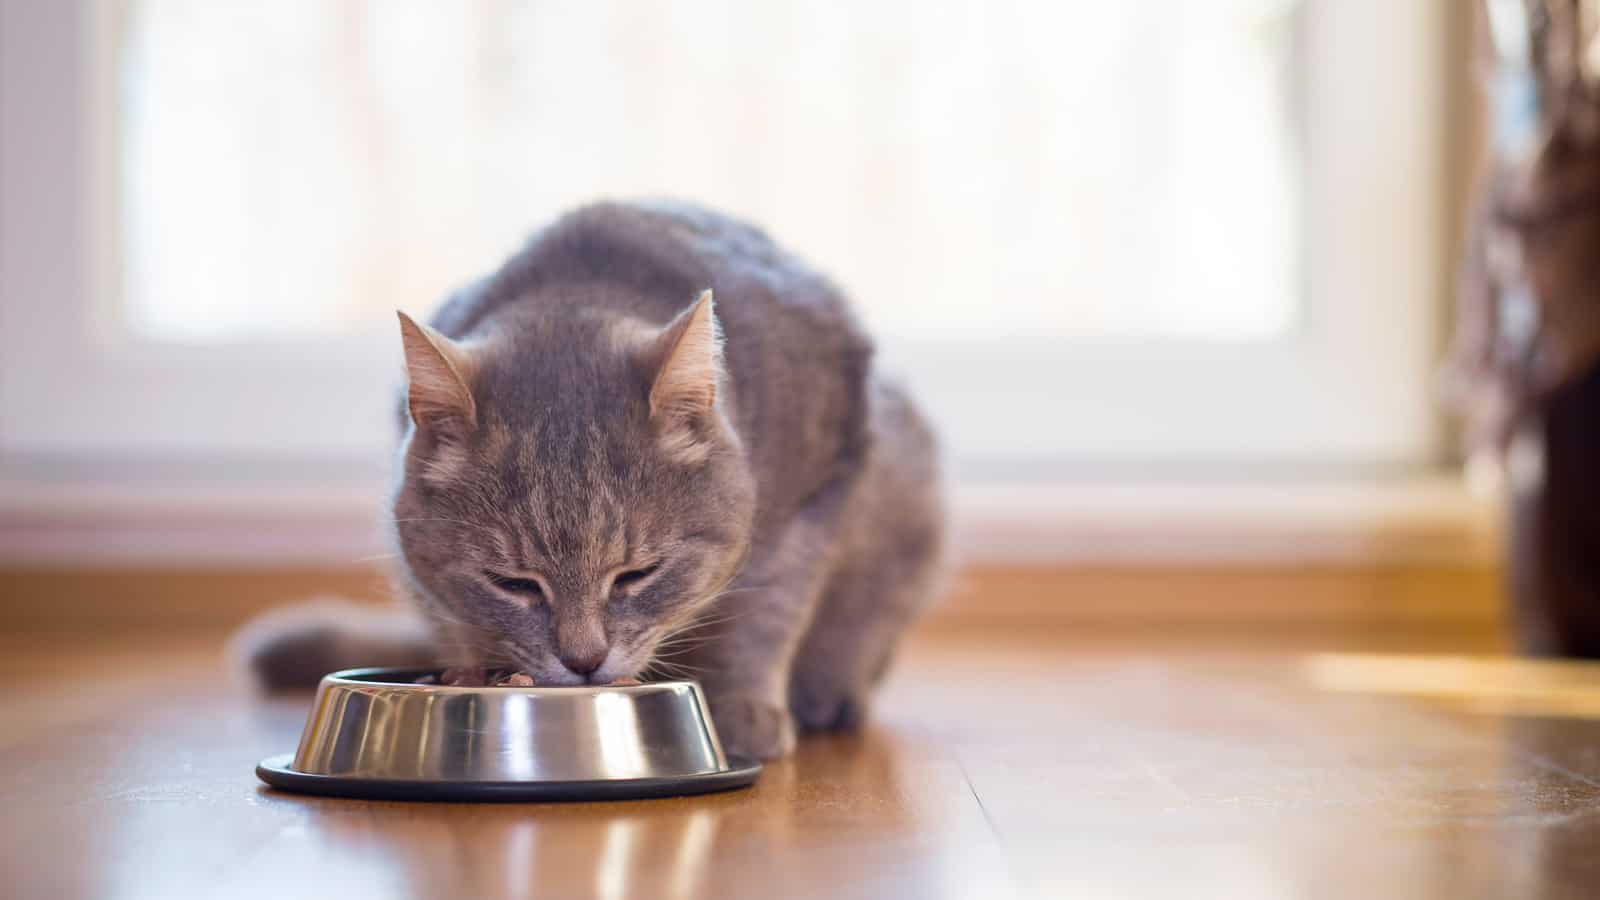 Beautiful tabby cat sitting next to a food bowl, placed on the floor next to the living room window, and eating. Selective focus